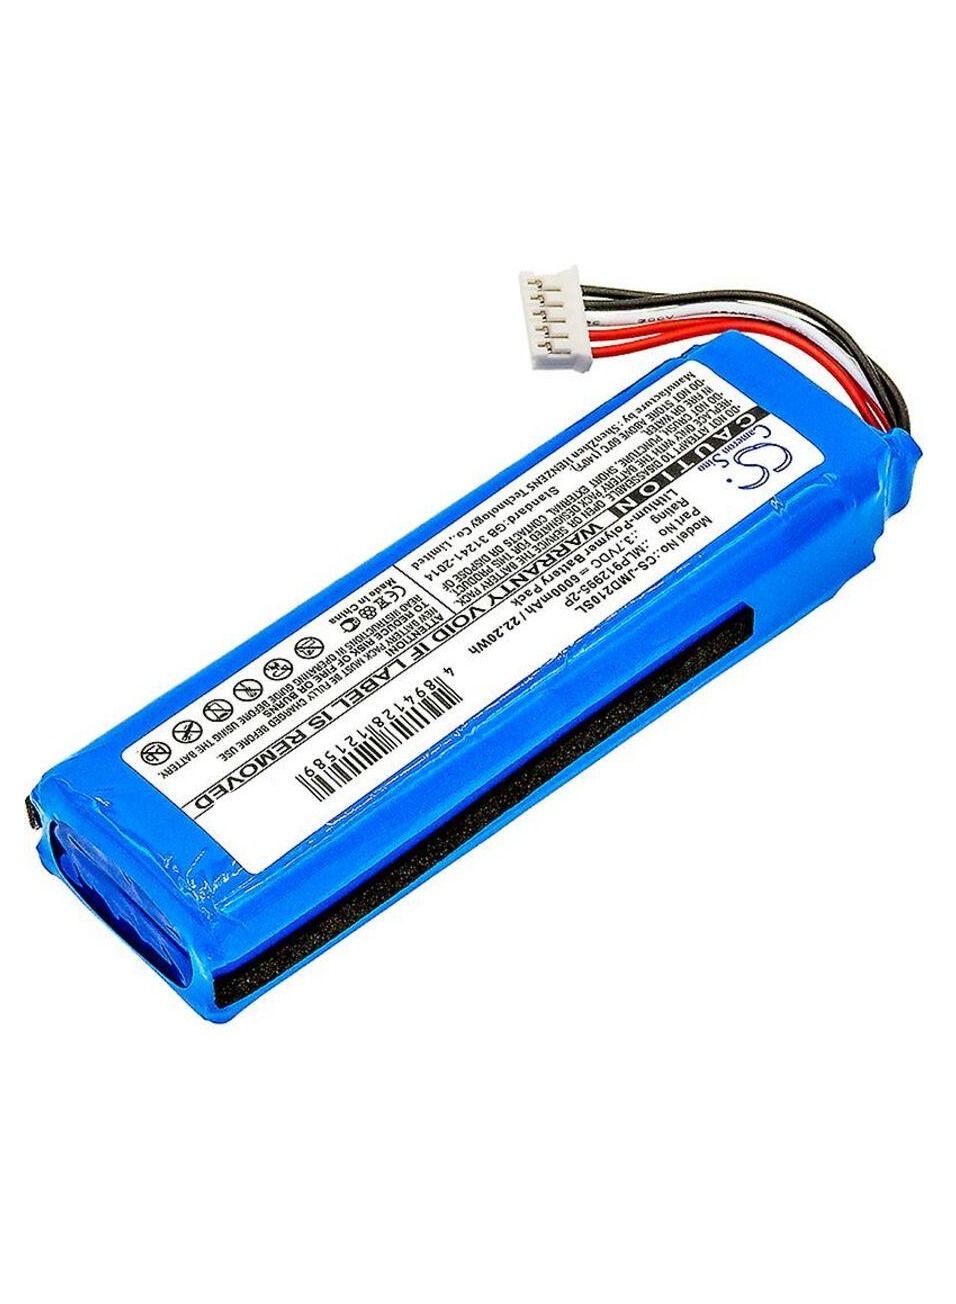 Cameron Sino Battery 6000mAh / 22.20Wh for JBL Charge 2 Plus and Charge 2+ Replacement Part No GSP1029102, MLP912995-2P 